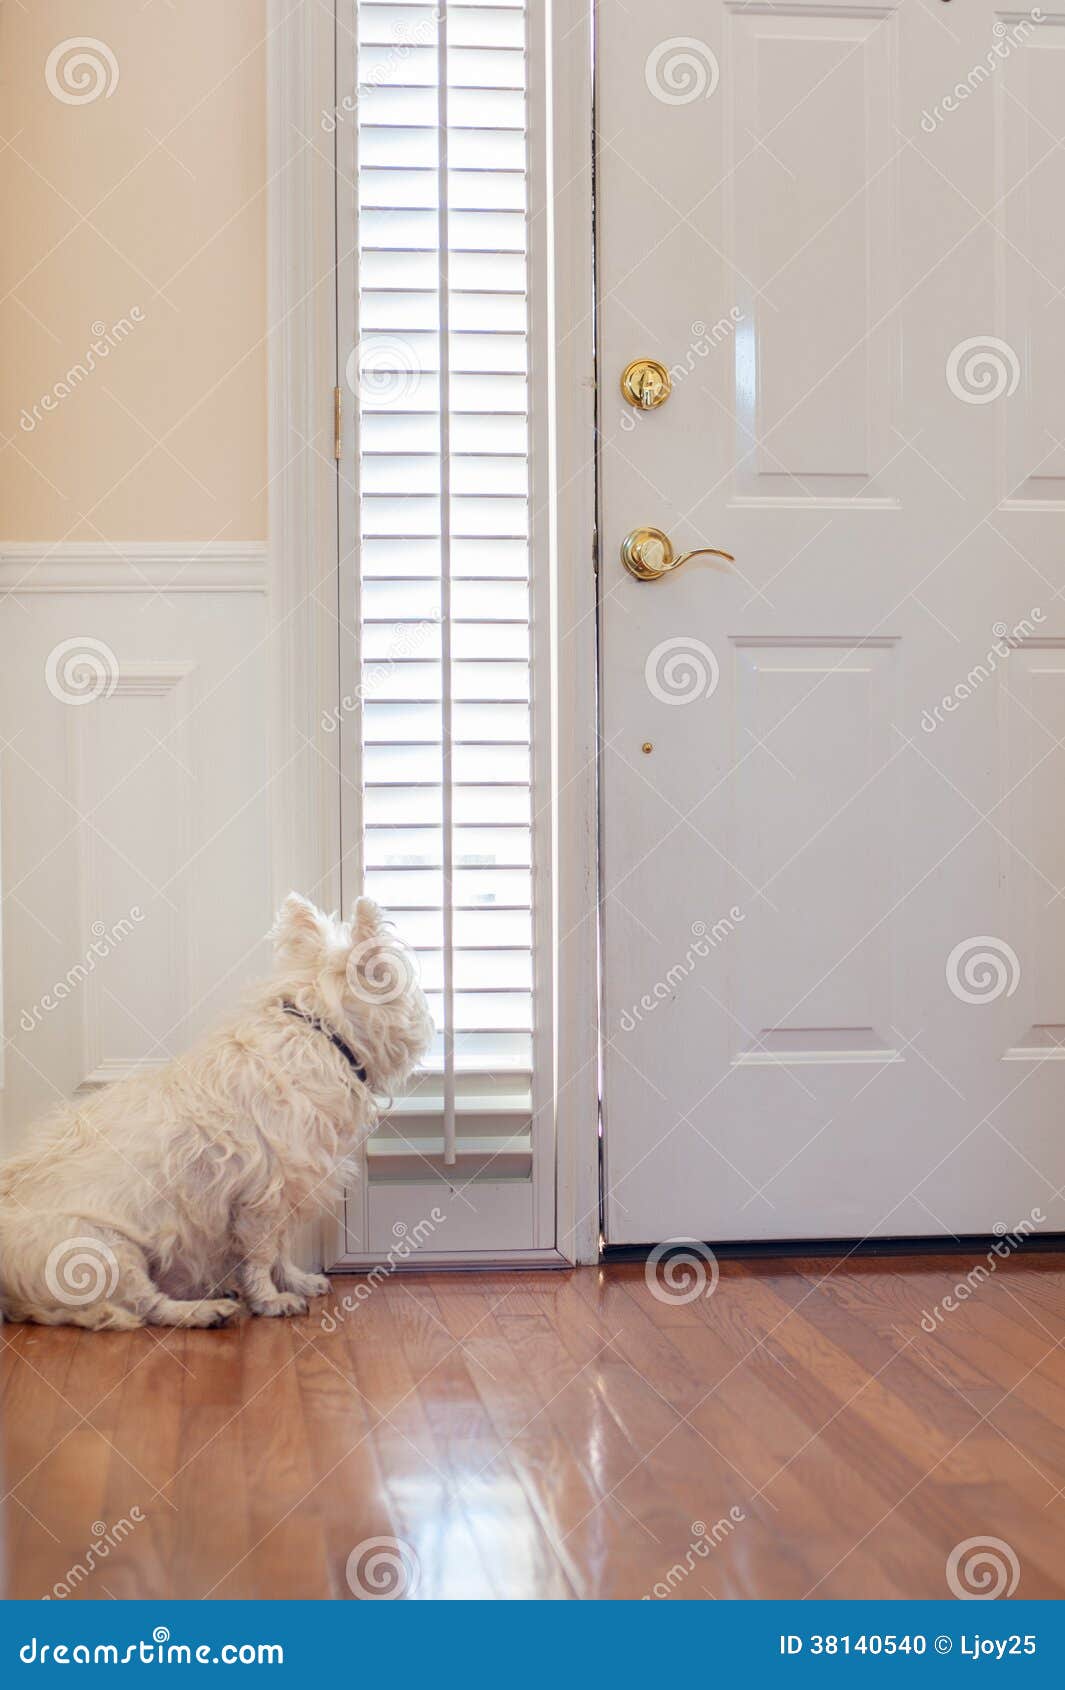 Dog waiting at the door stock photo. Image of building - 38140540